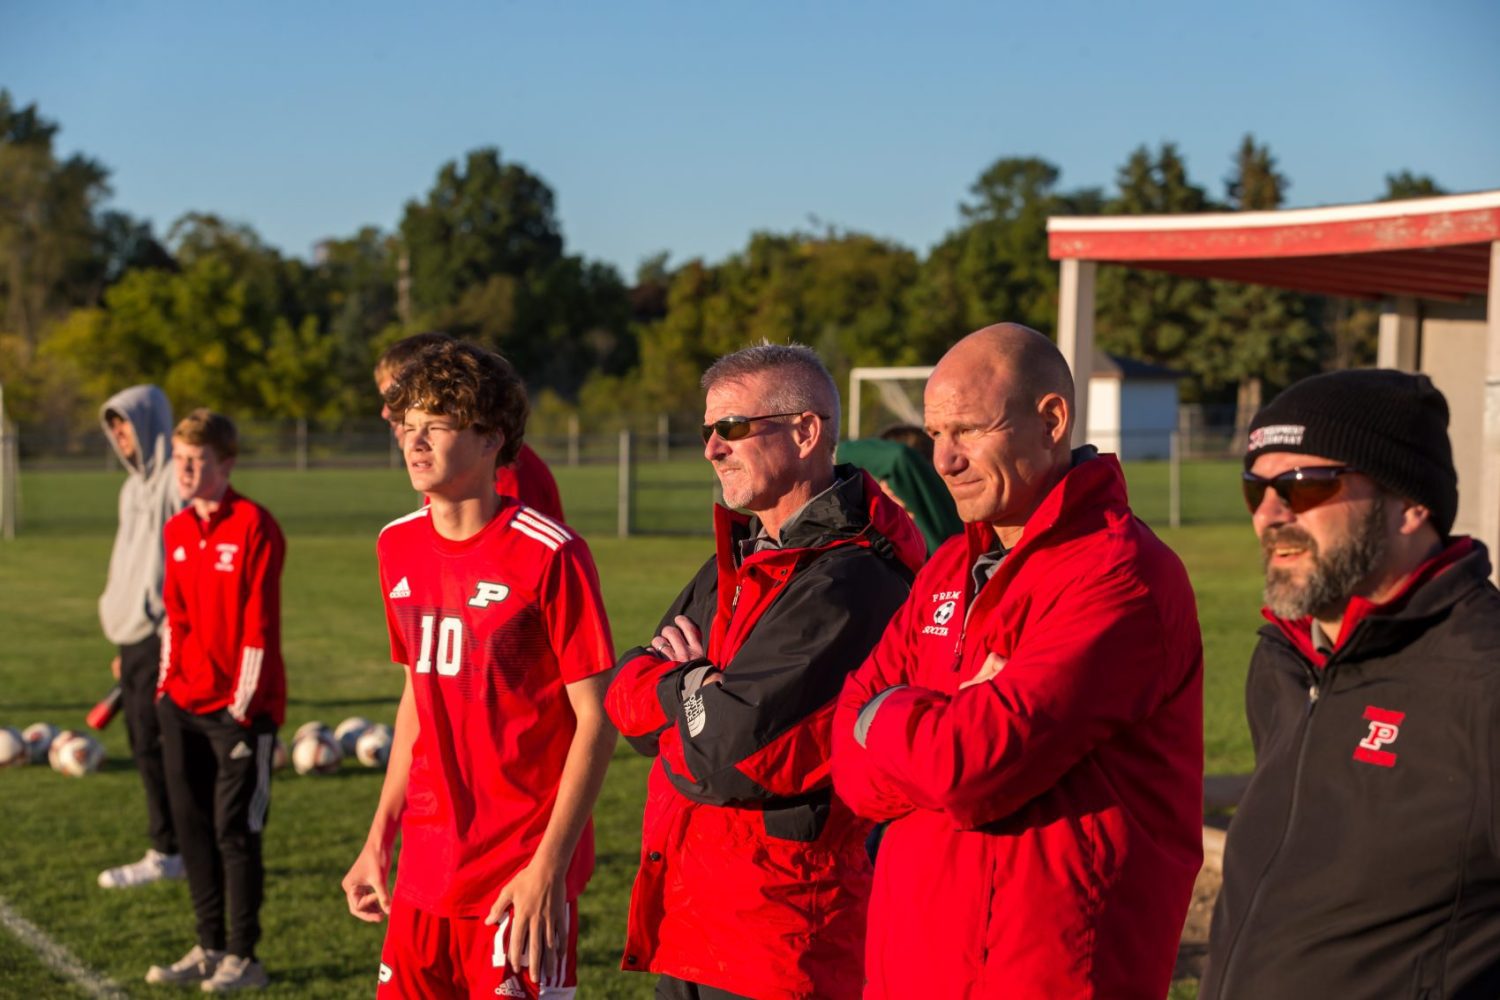 Vissia’s approach to coaching goes much deeper than wins and losses